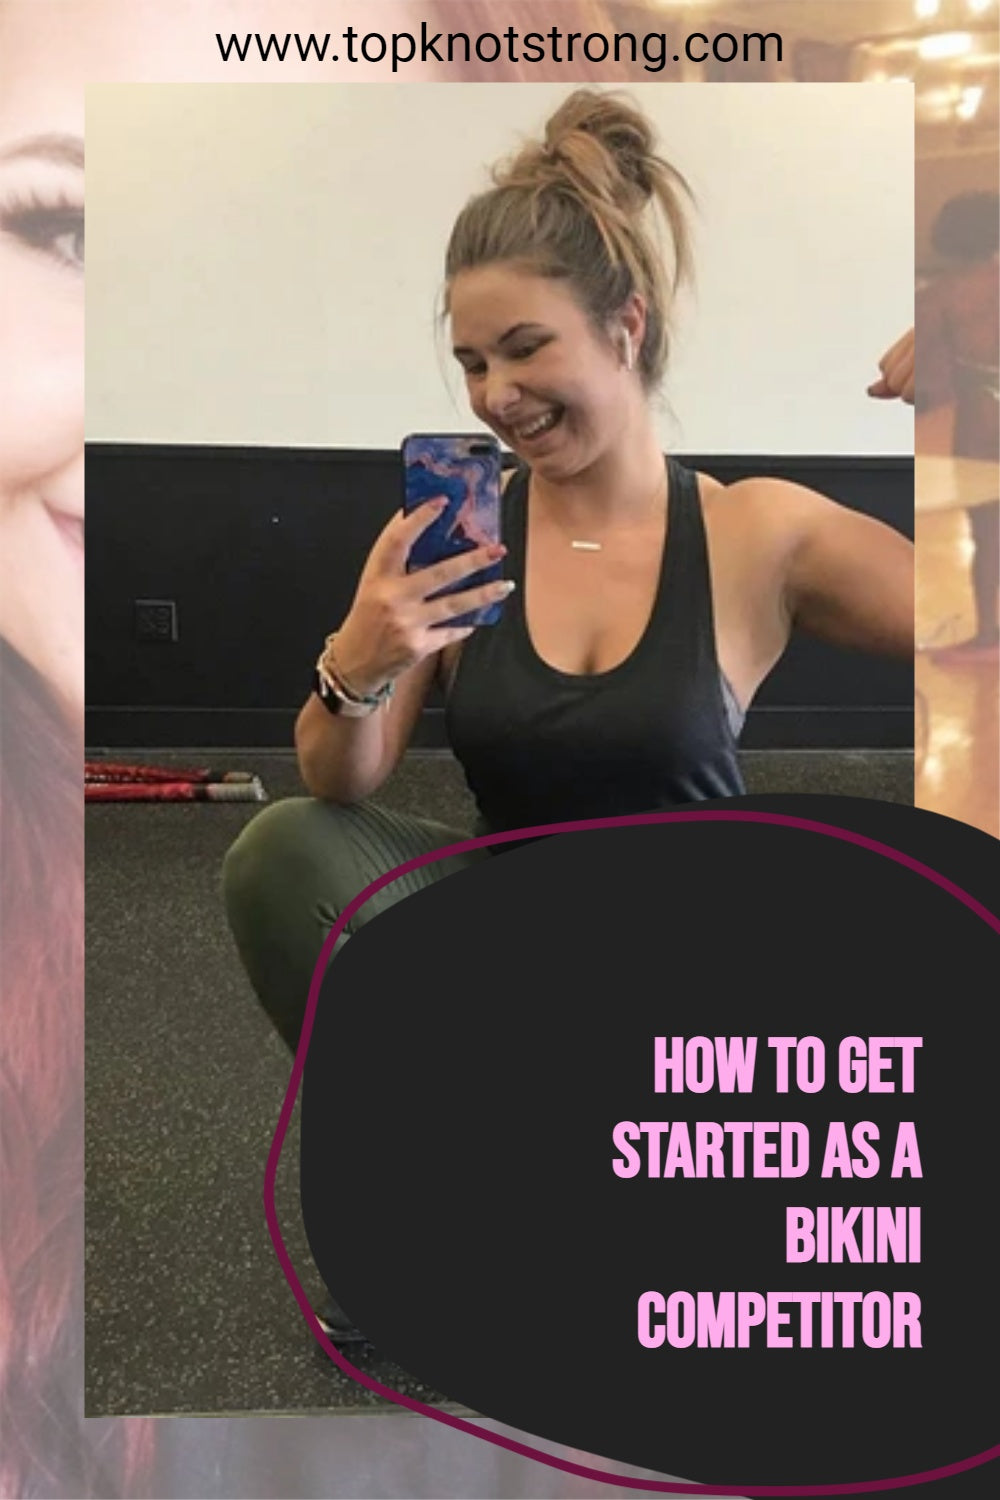 How to get Started as a Bikini Competitor